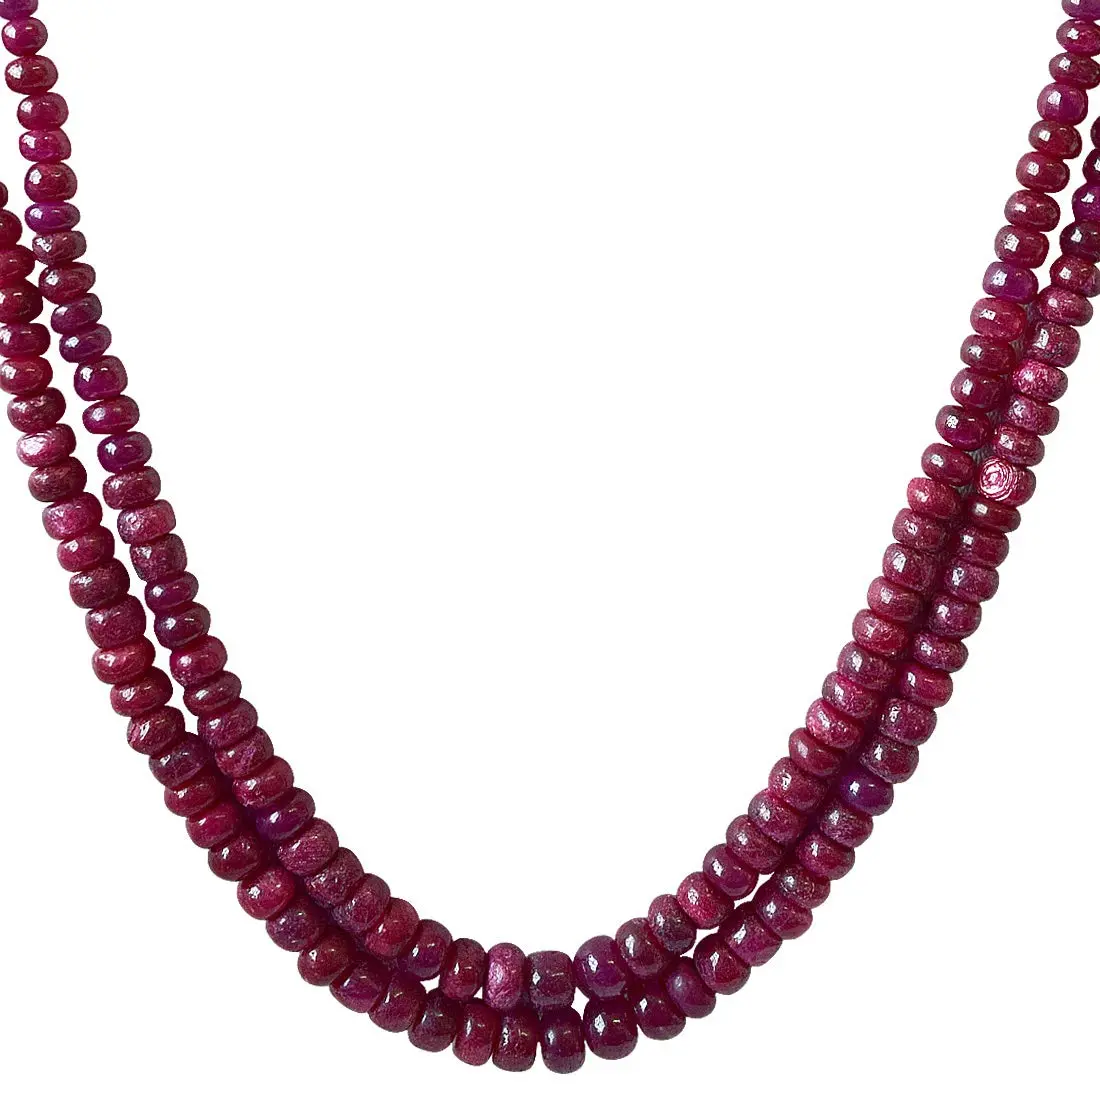 341.24cts 2 Line Real Red Ruby Beads Necklace for Women (341.24ctsRubyNeck)